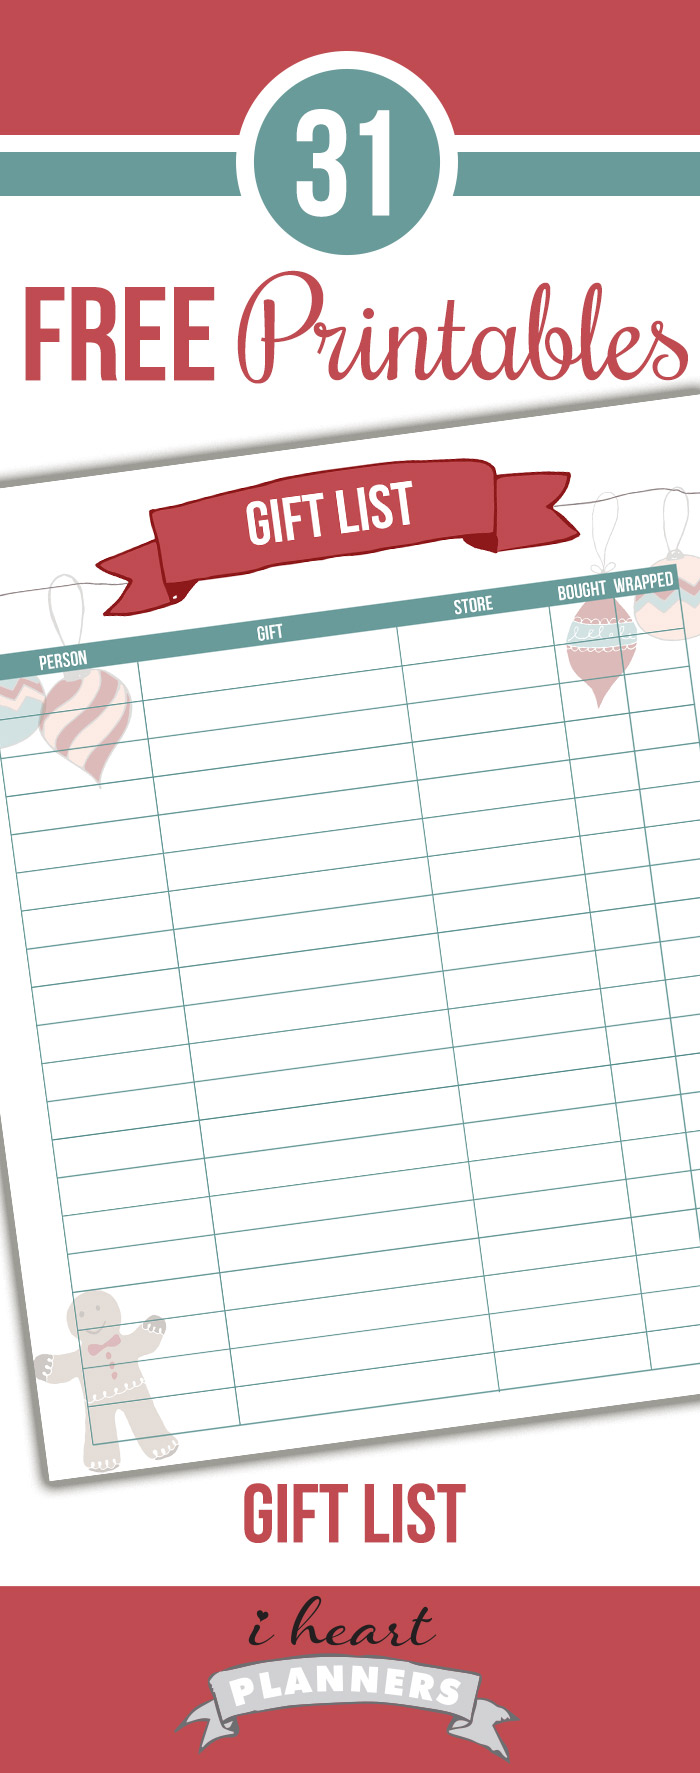 Free gift tracker printable - great way to keep track of all the holiday gifts that you need to purchase and wrap.